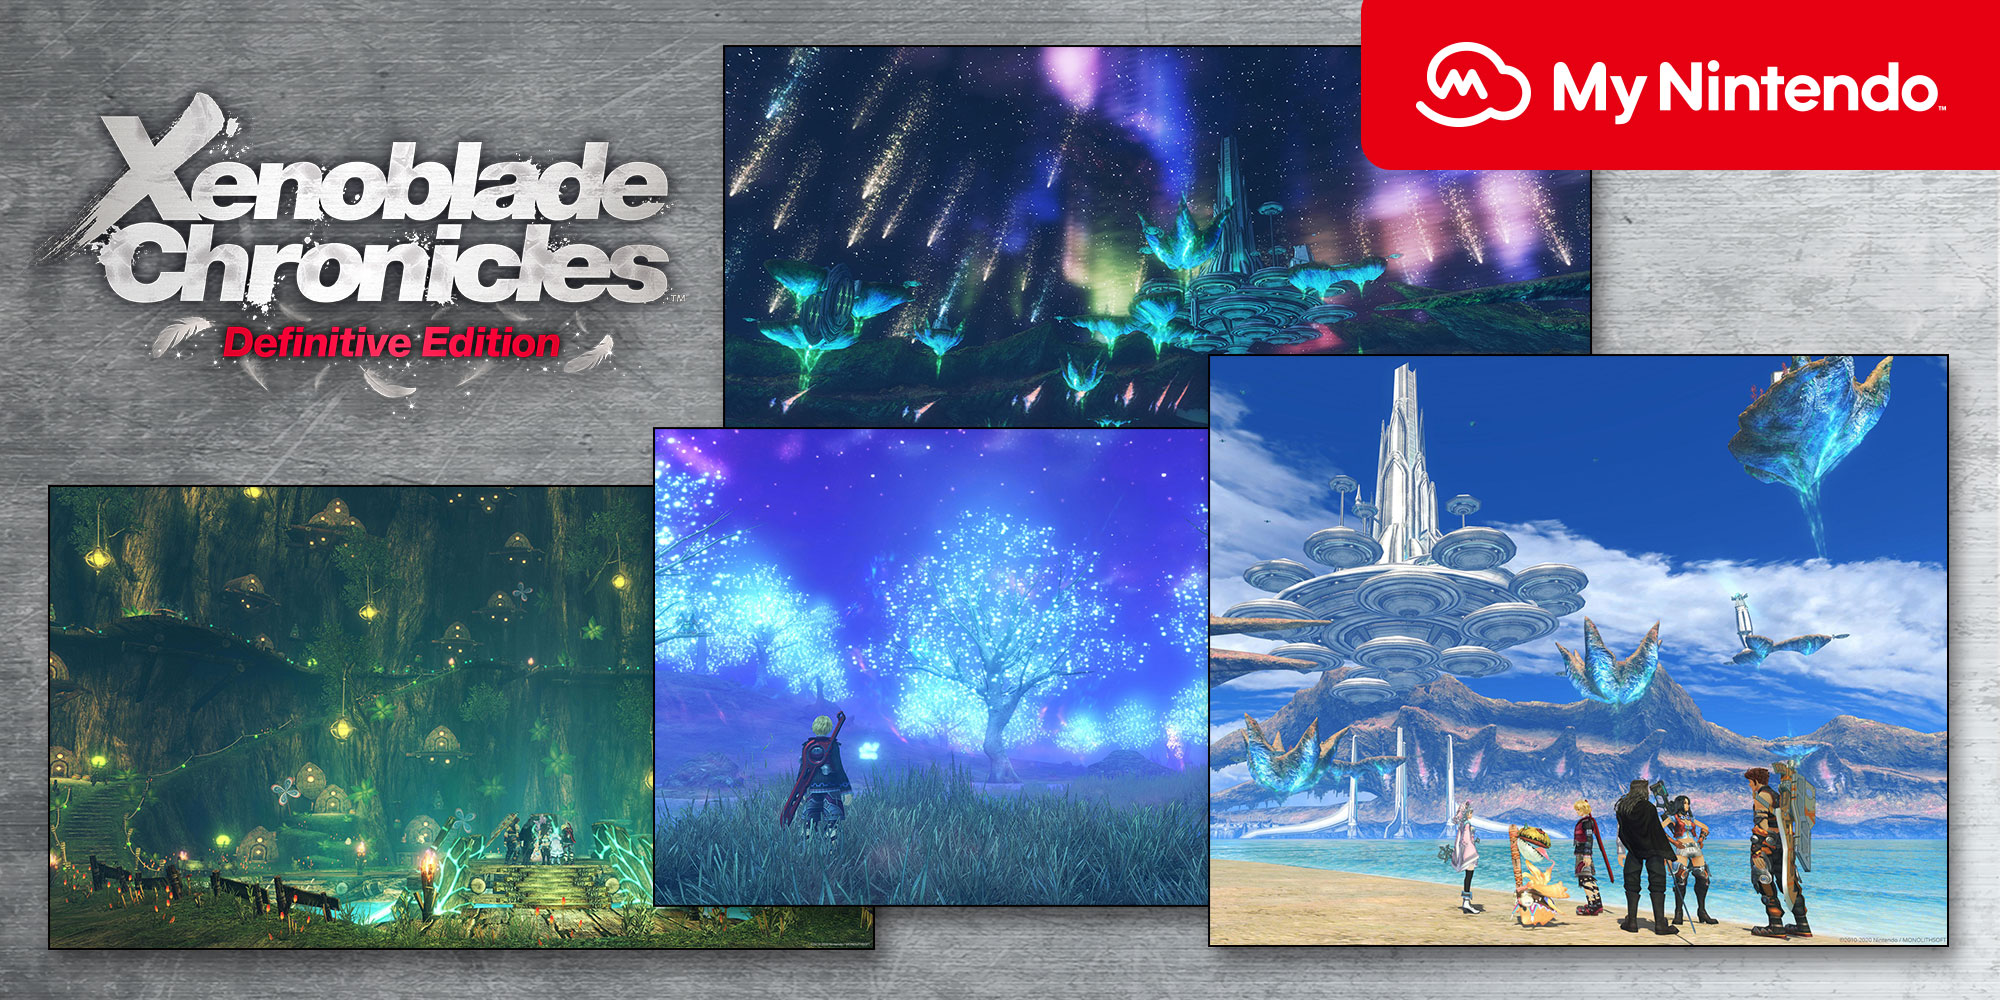 My Nintendo offers free Xenoblade Chronicles: Definitive Edition wallpapers  in Europe